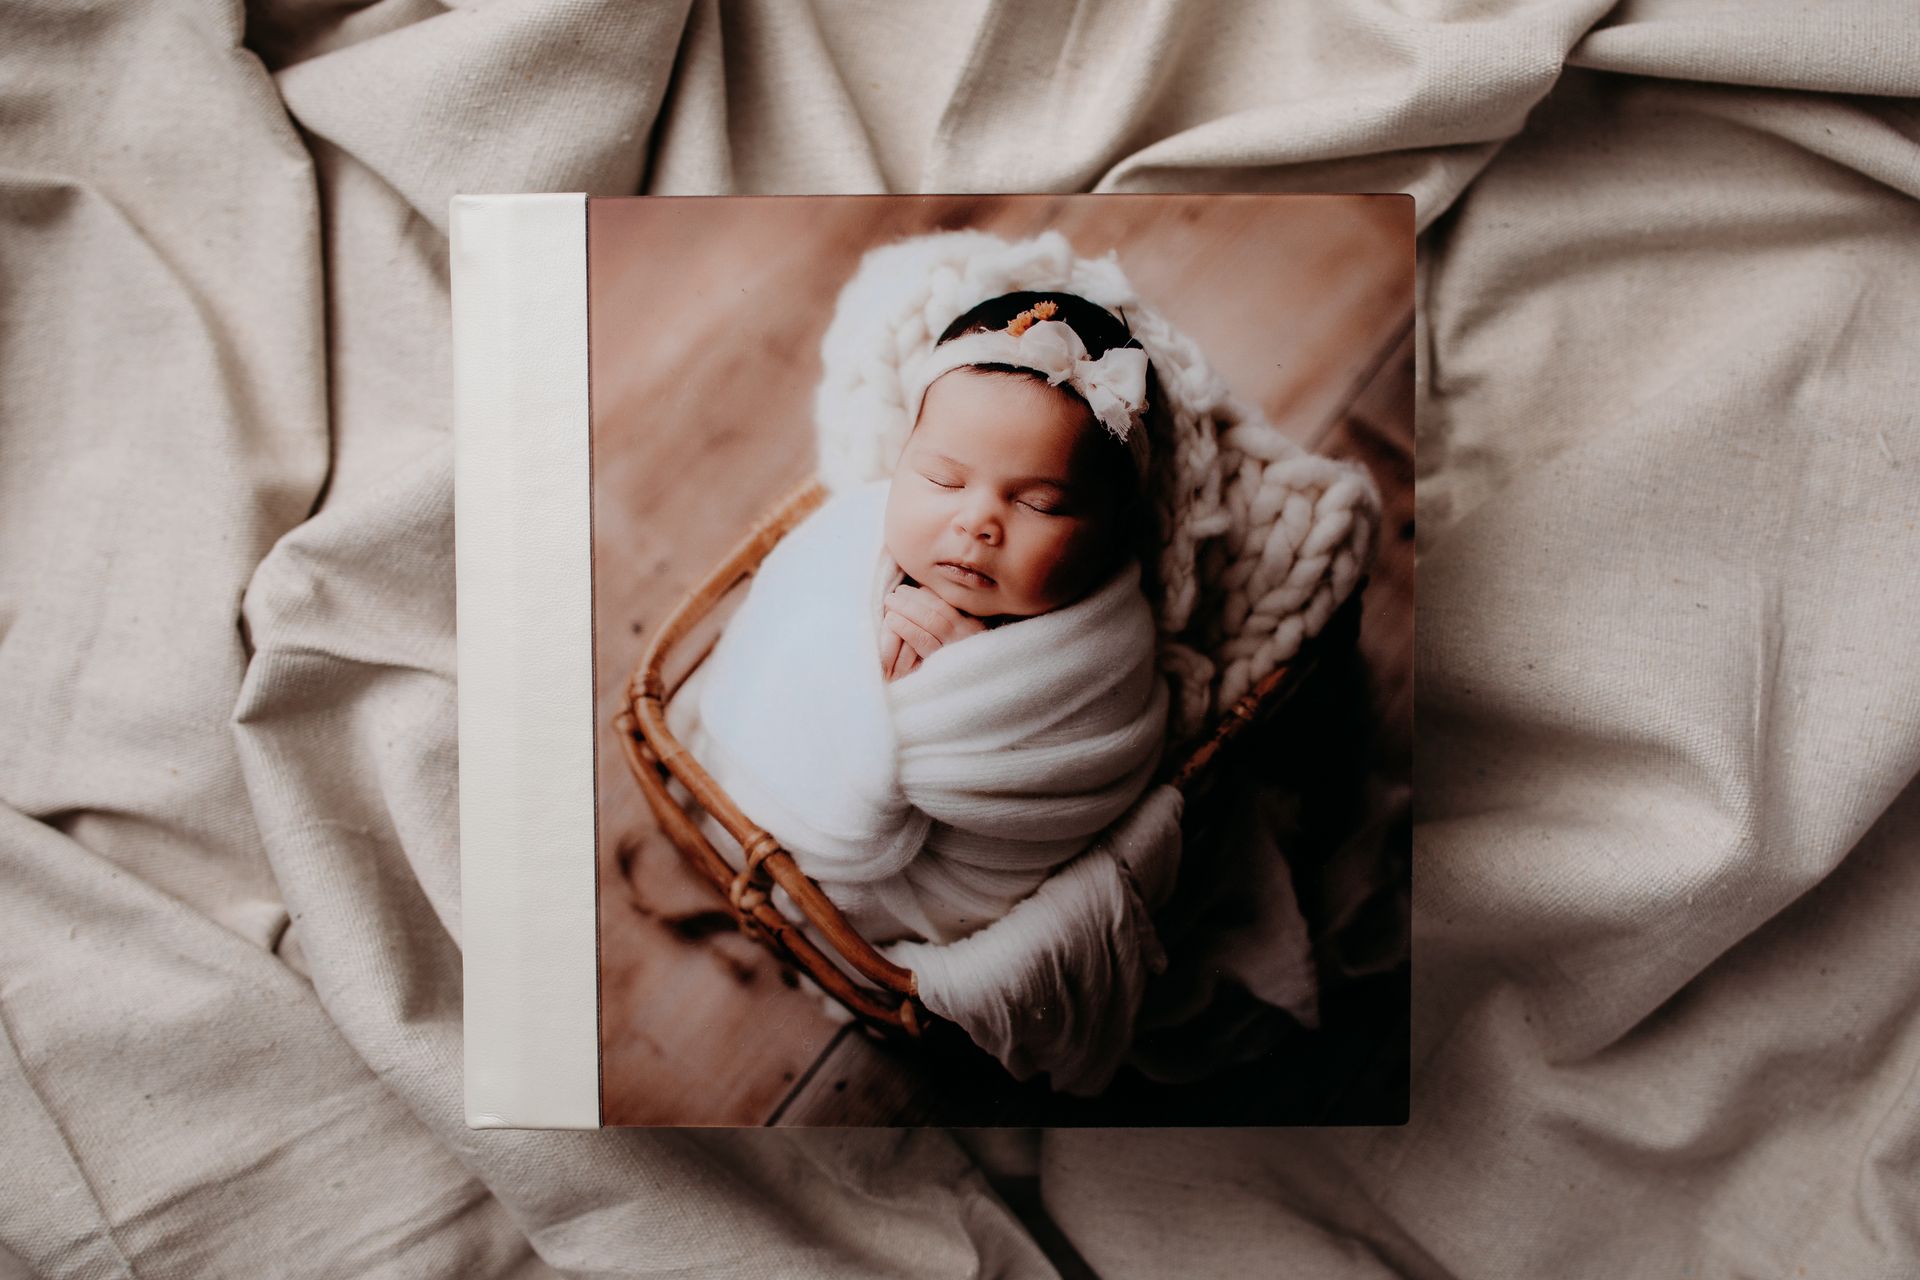 A baby is wrapped in a white blanket and sleeping in a basket.